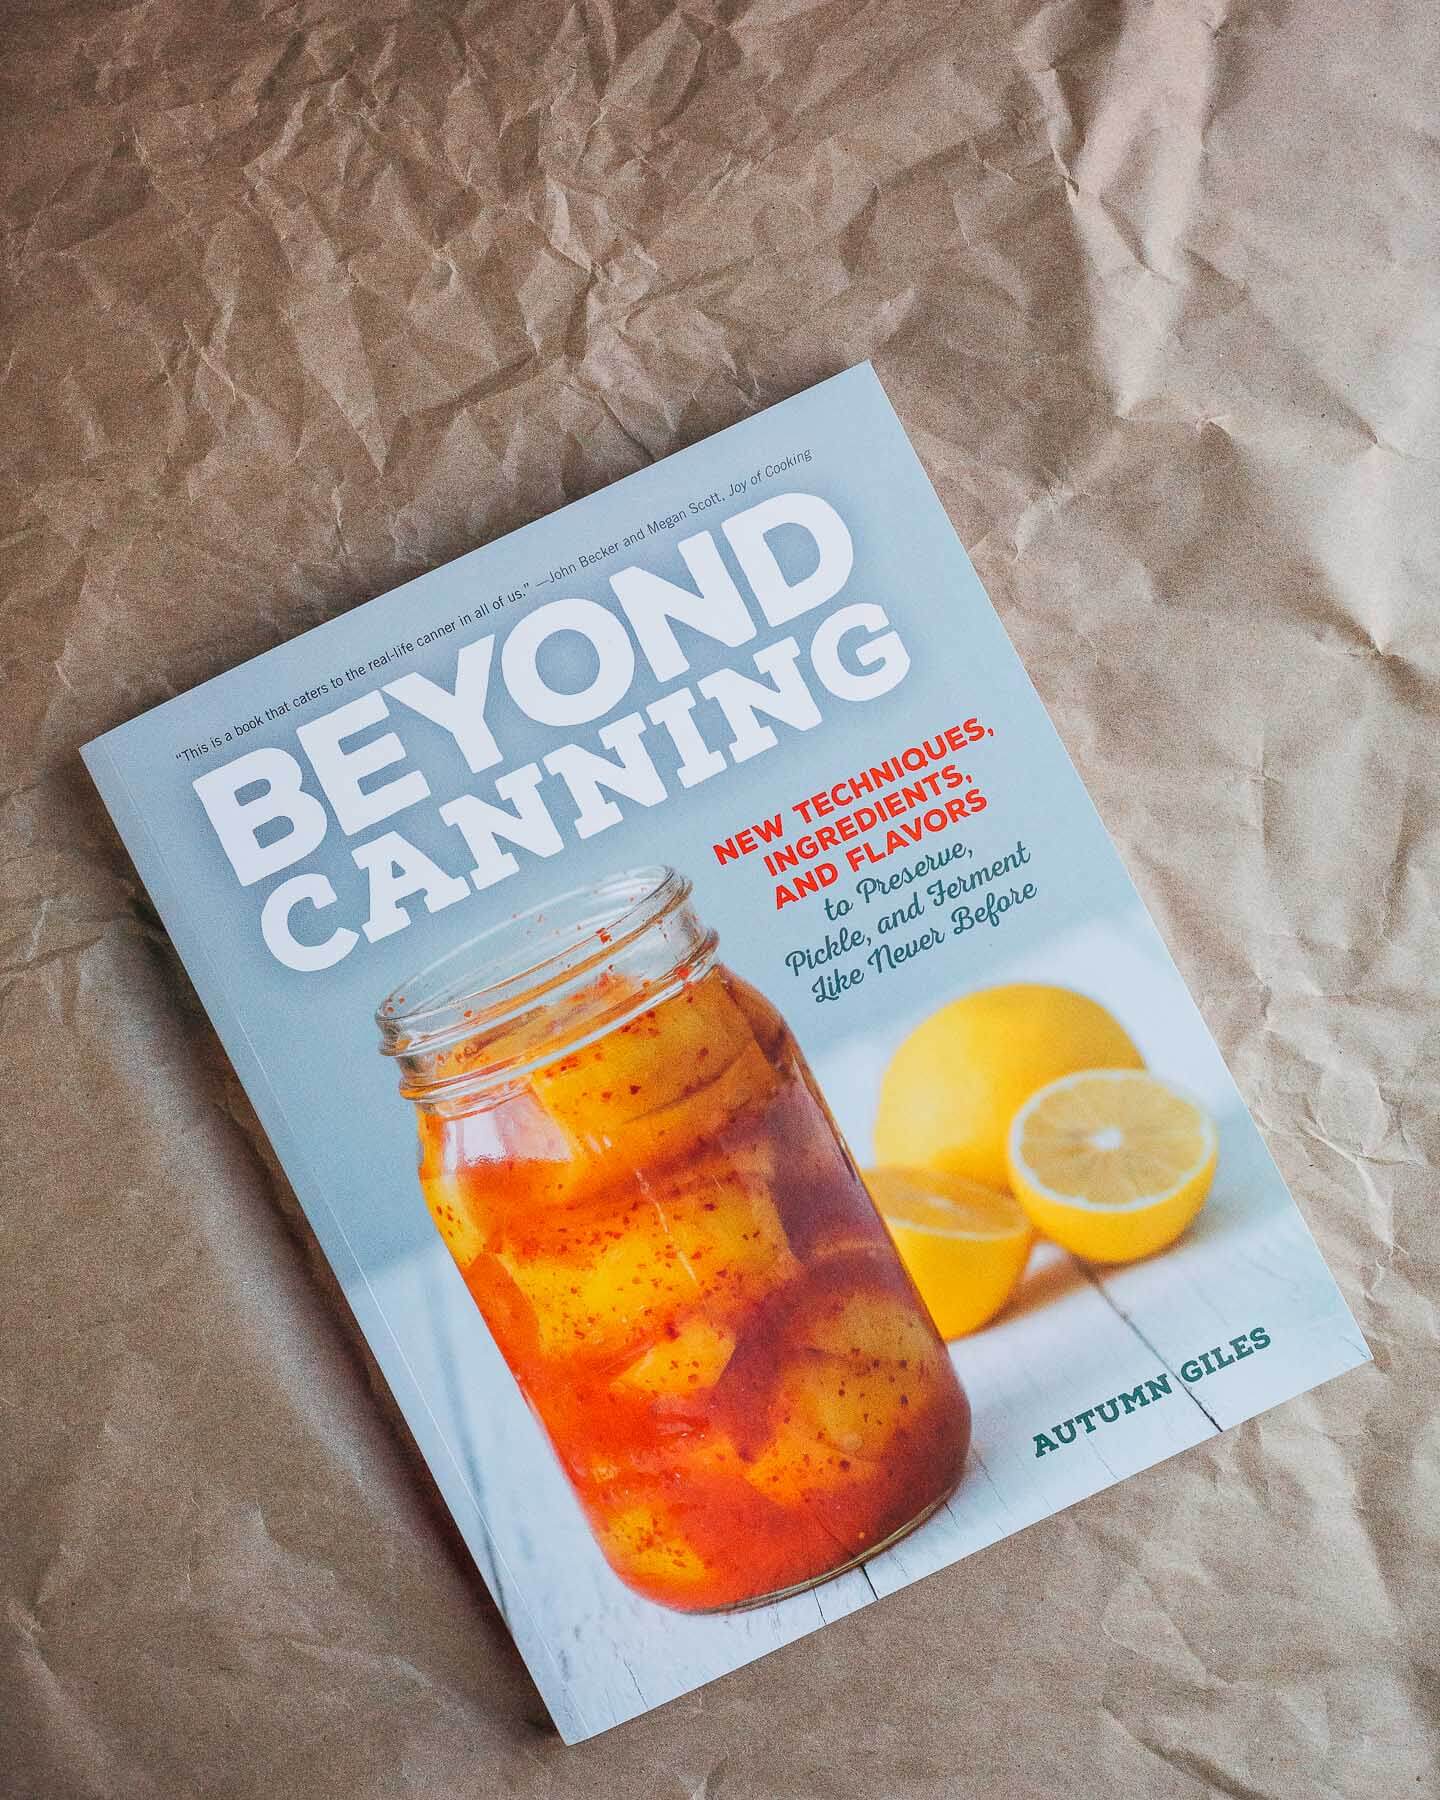 beyond canning by autumn giles